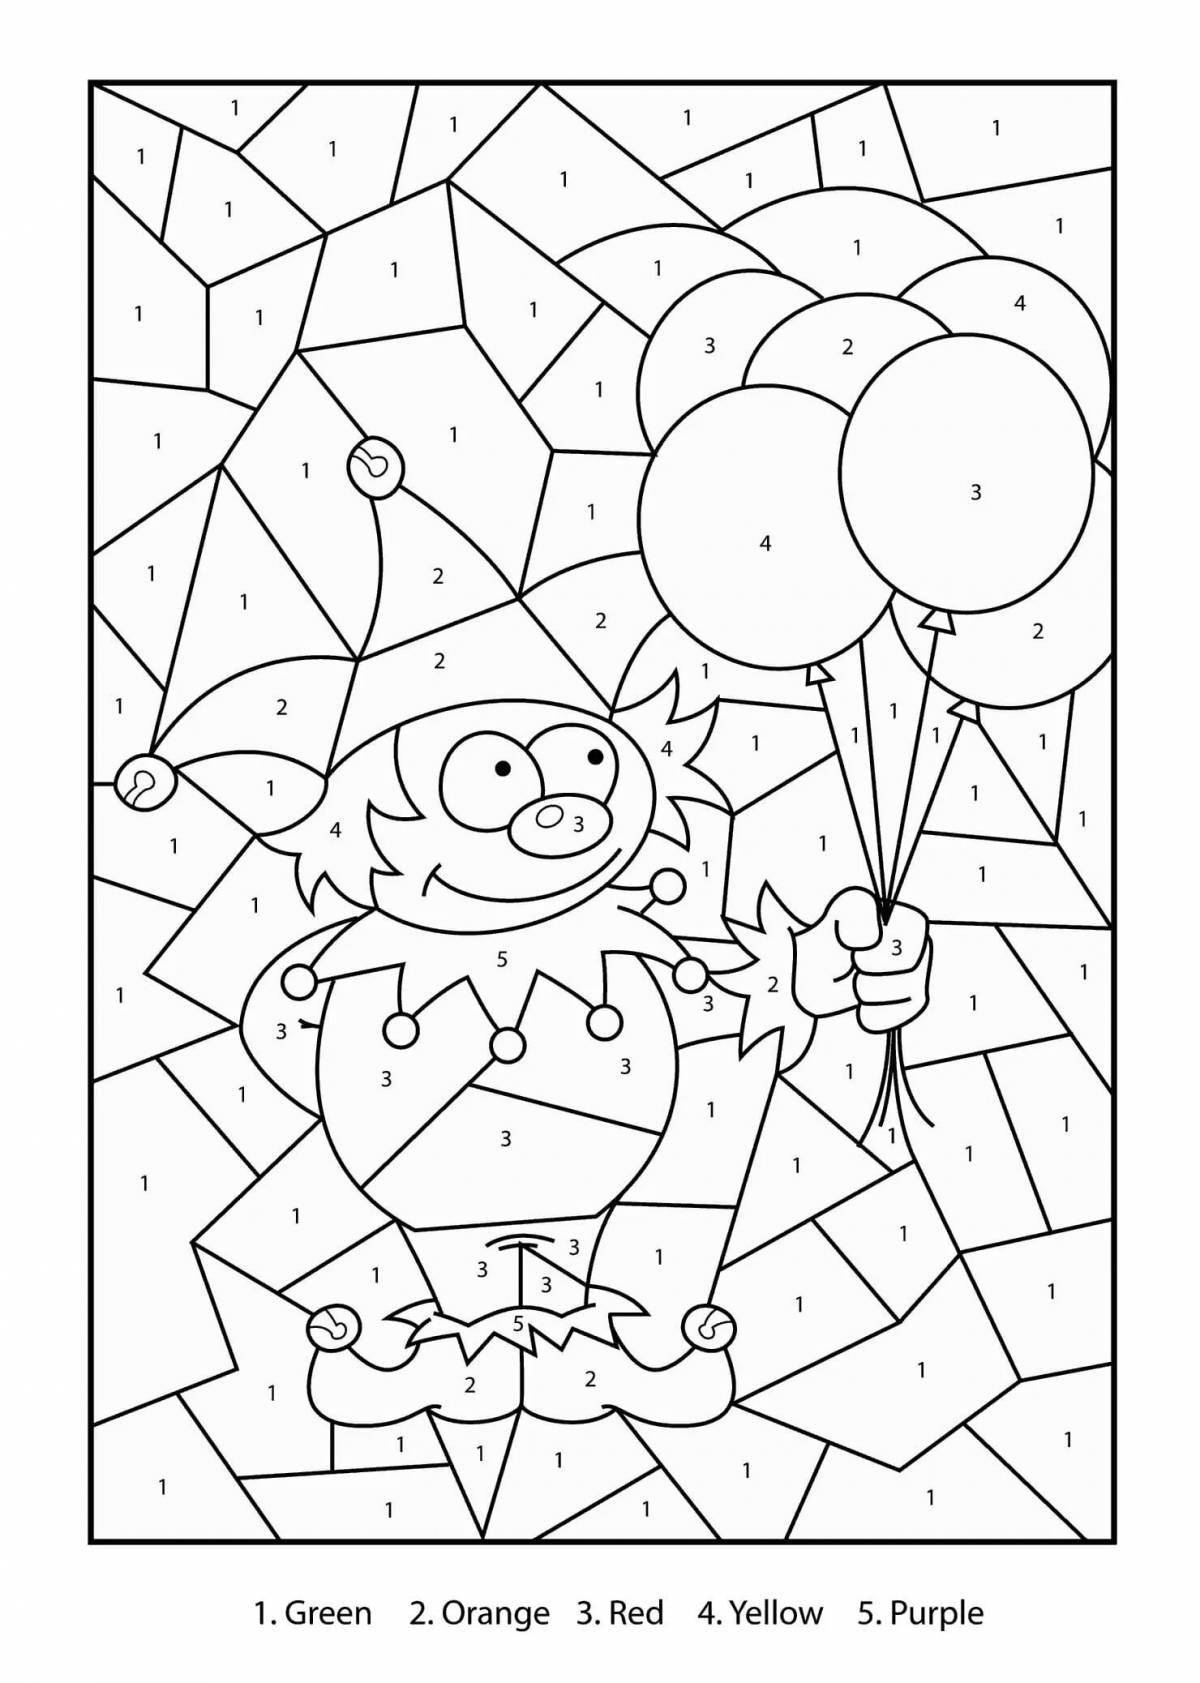 Attractive professions coloring page